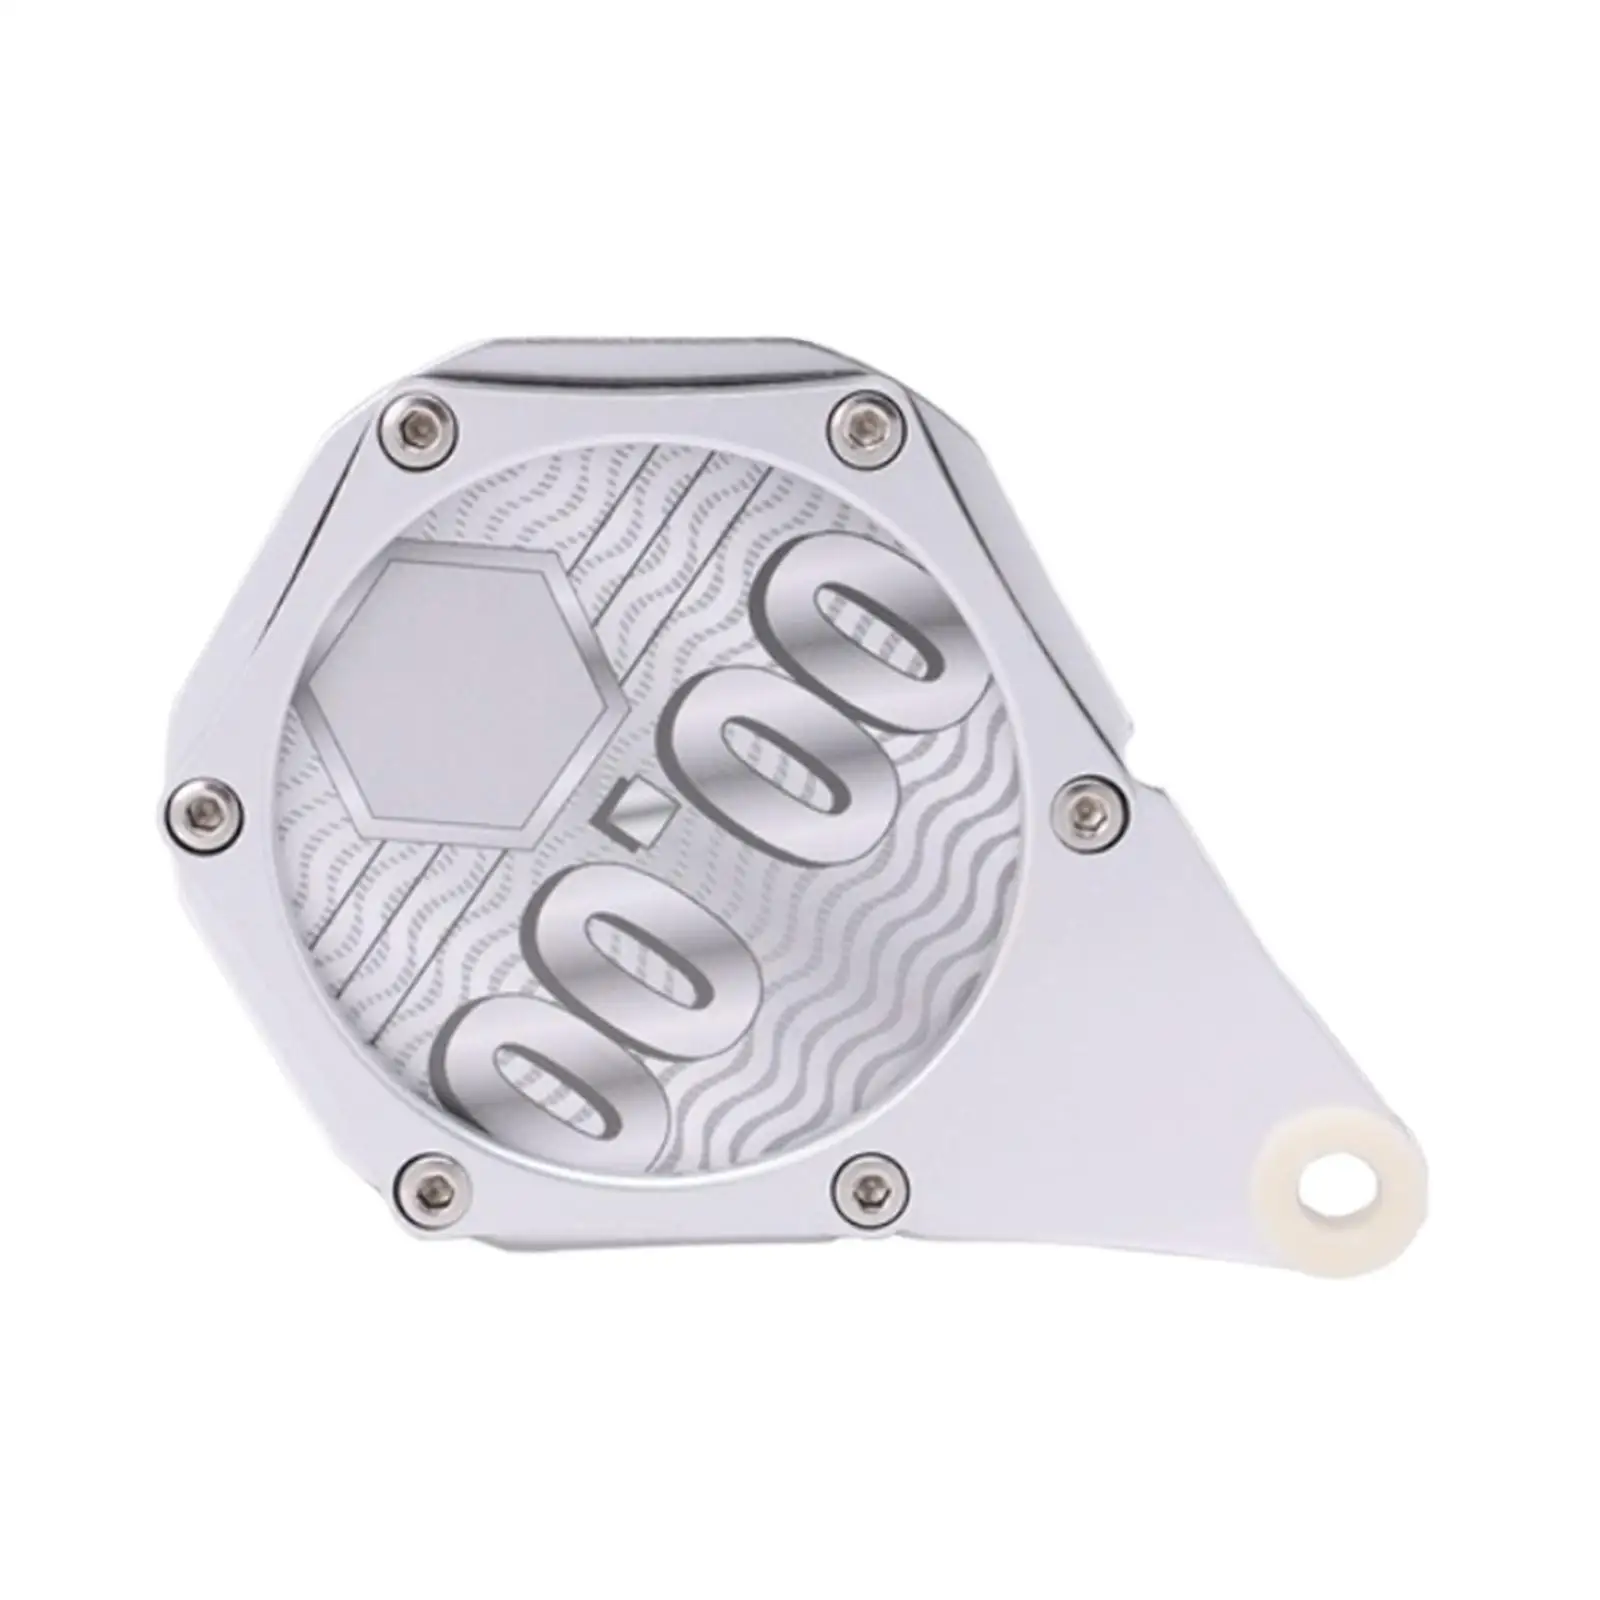 Hexagon Tax Disc Plate Motorcycle Supplies for Scooter Motor Motorcycle